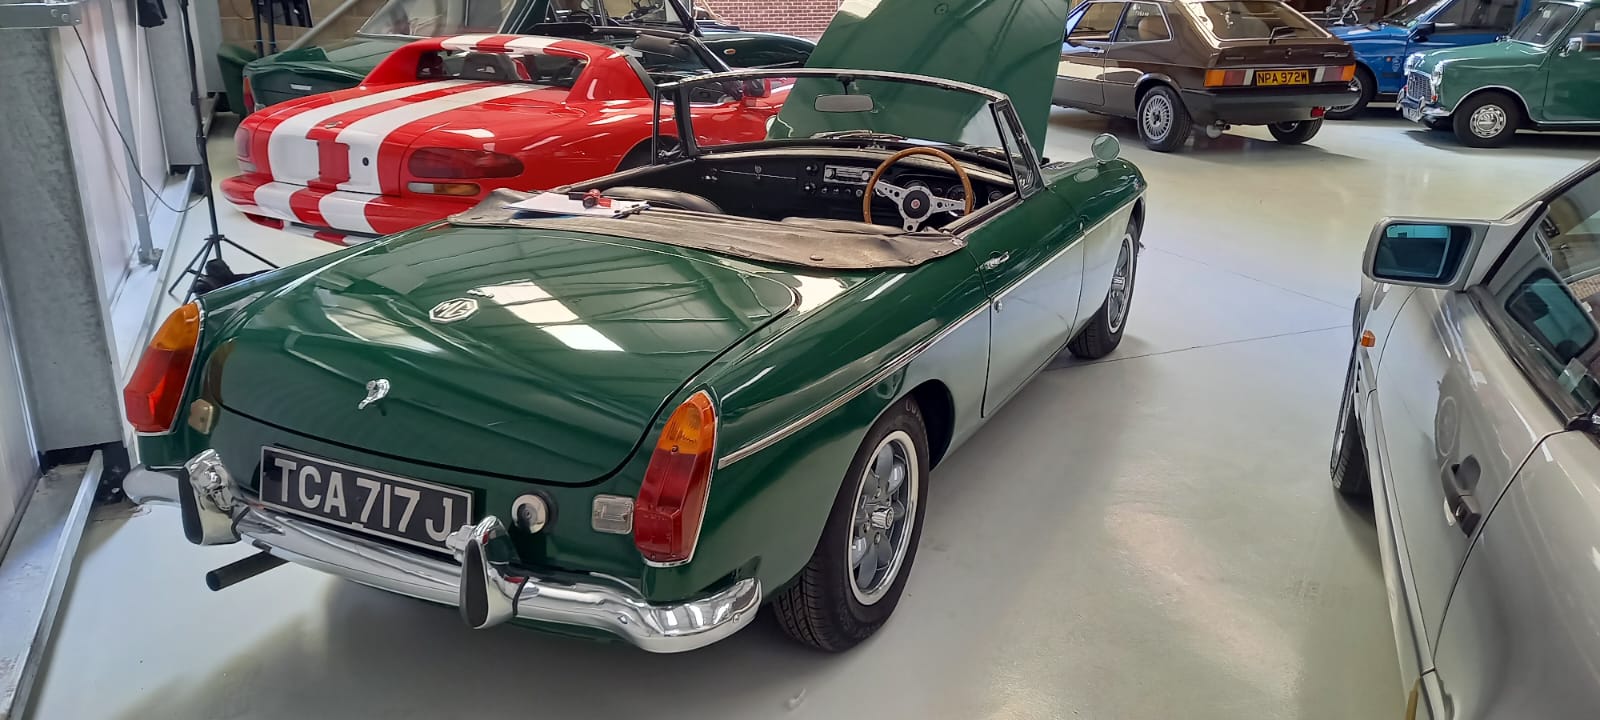 1971 MG B Roadster Brake Master Cylinder, Calipers, Track Rod End, Steering Straighened, Wheel Cylinders and Service (6)